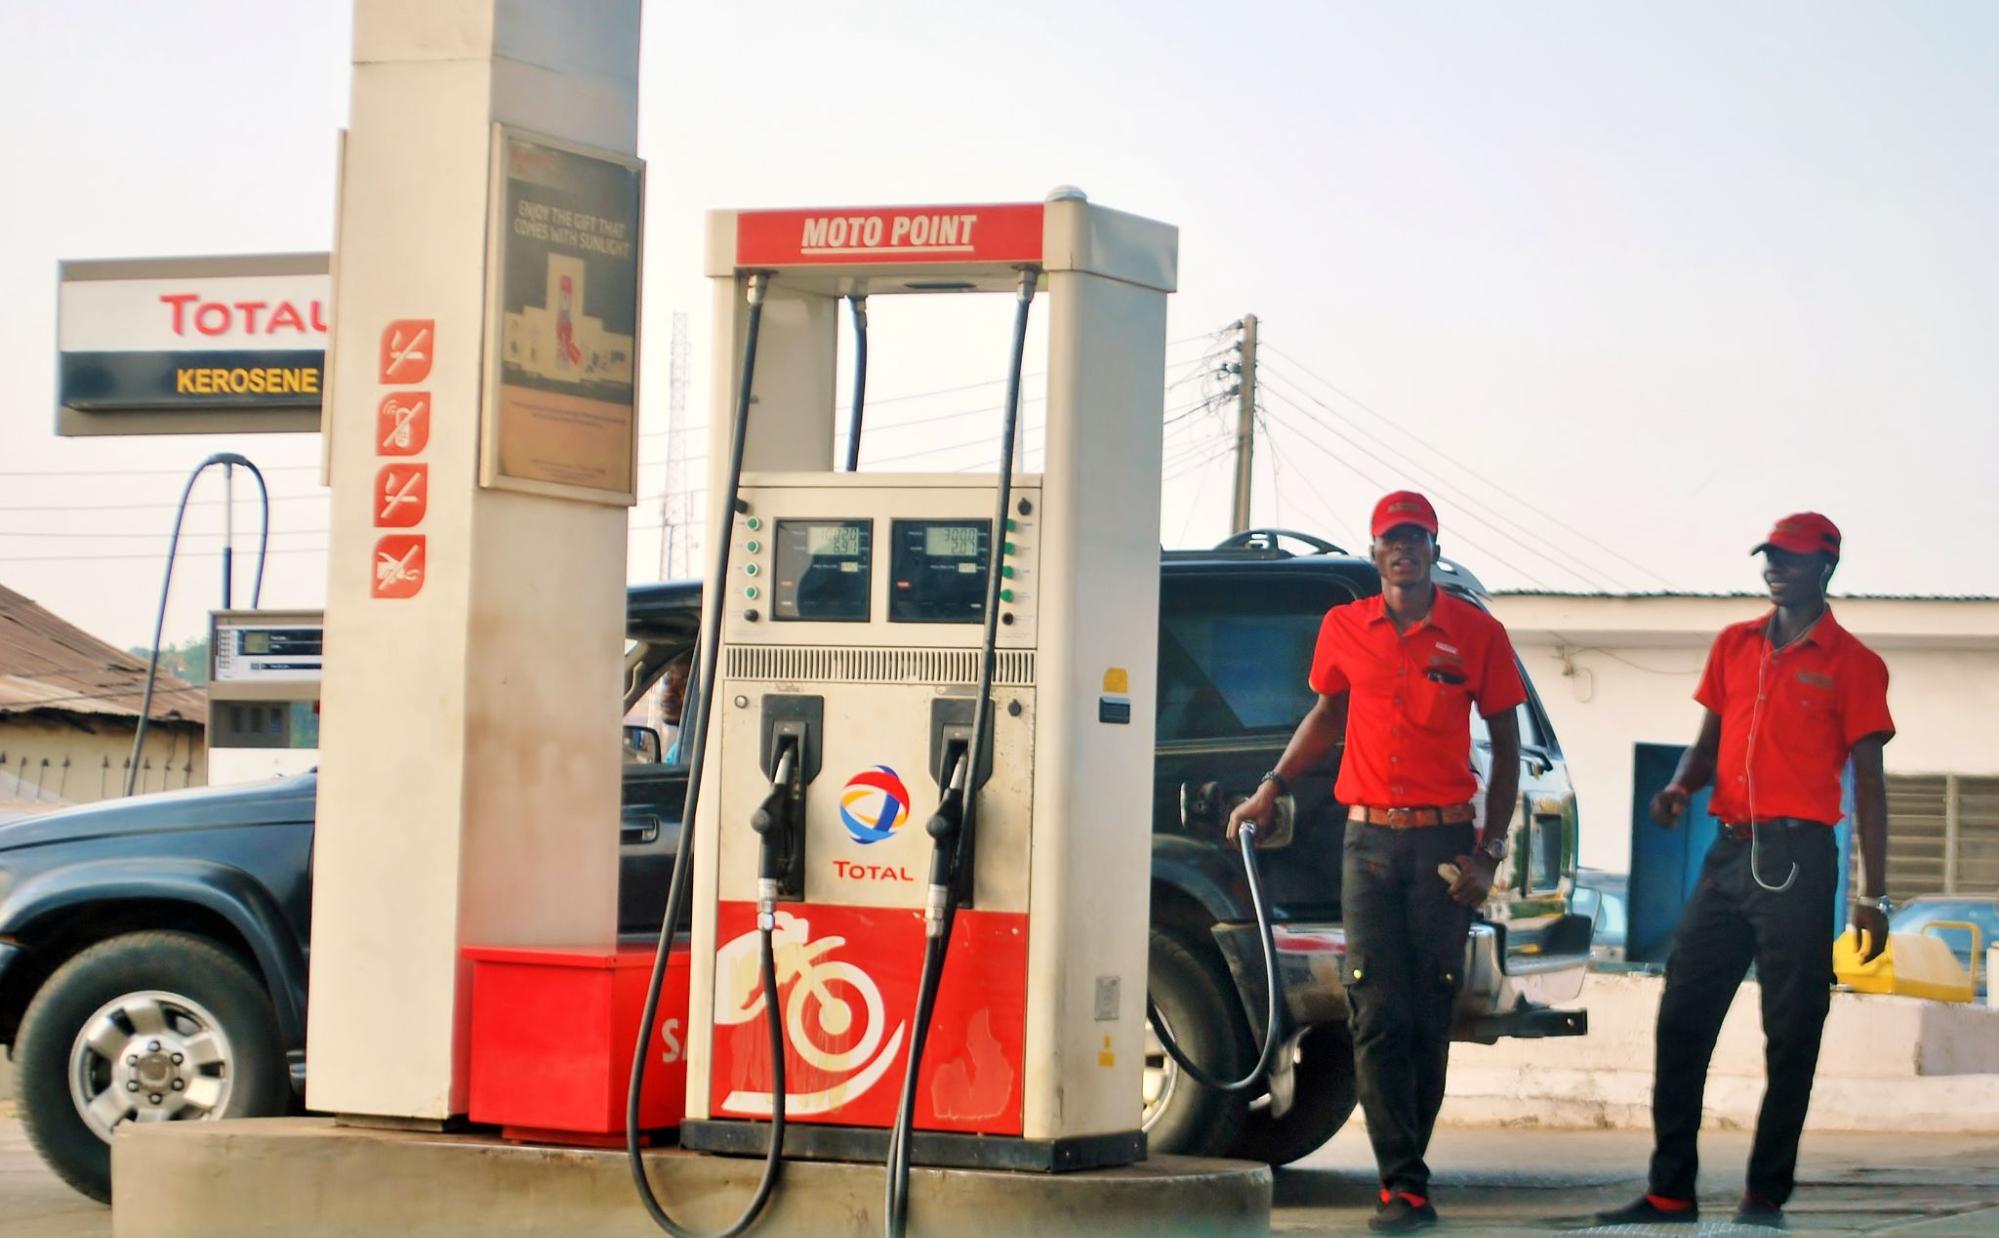 Nigeria: Oil, Oil Everywhere — But Not a Drop of Gasoline